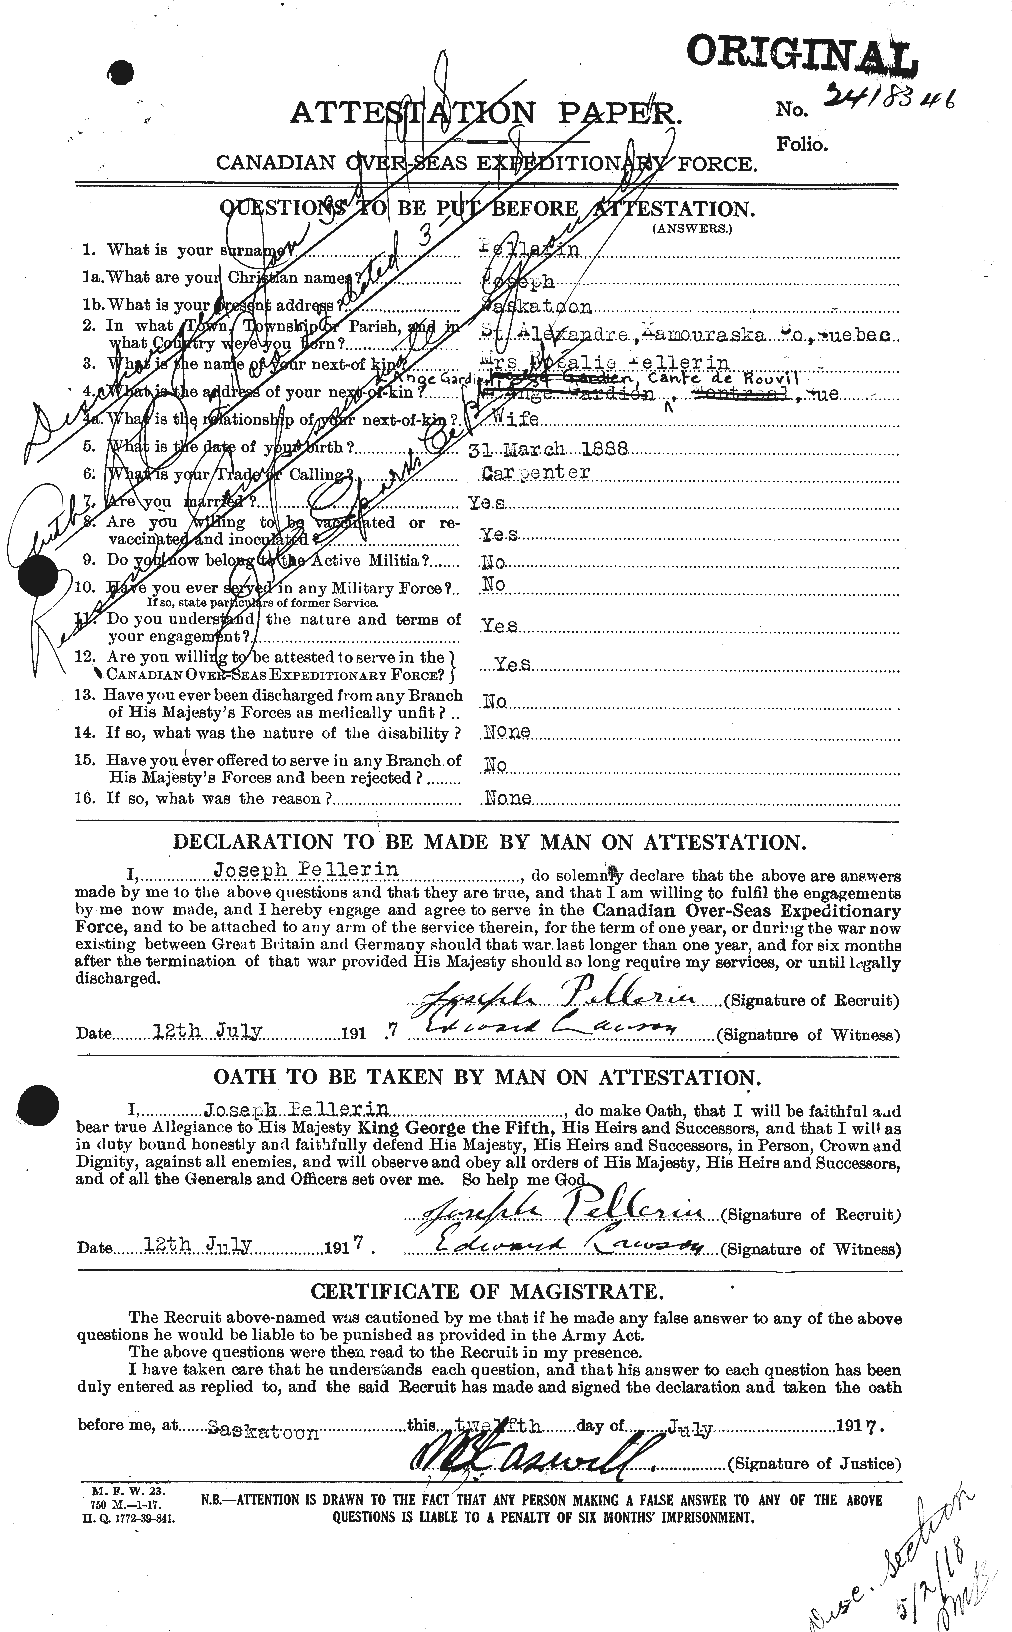 Personnel Records of the First World War - CEF 572254a